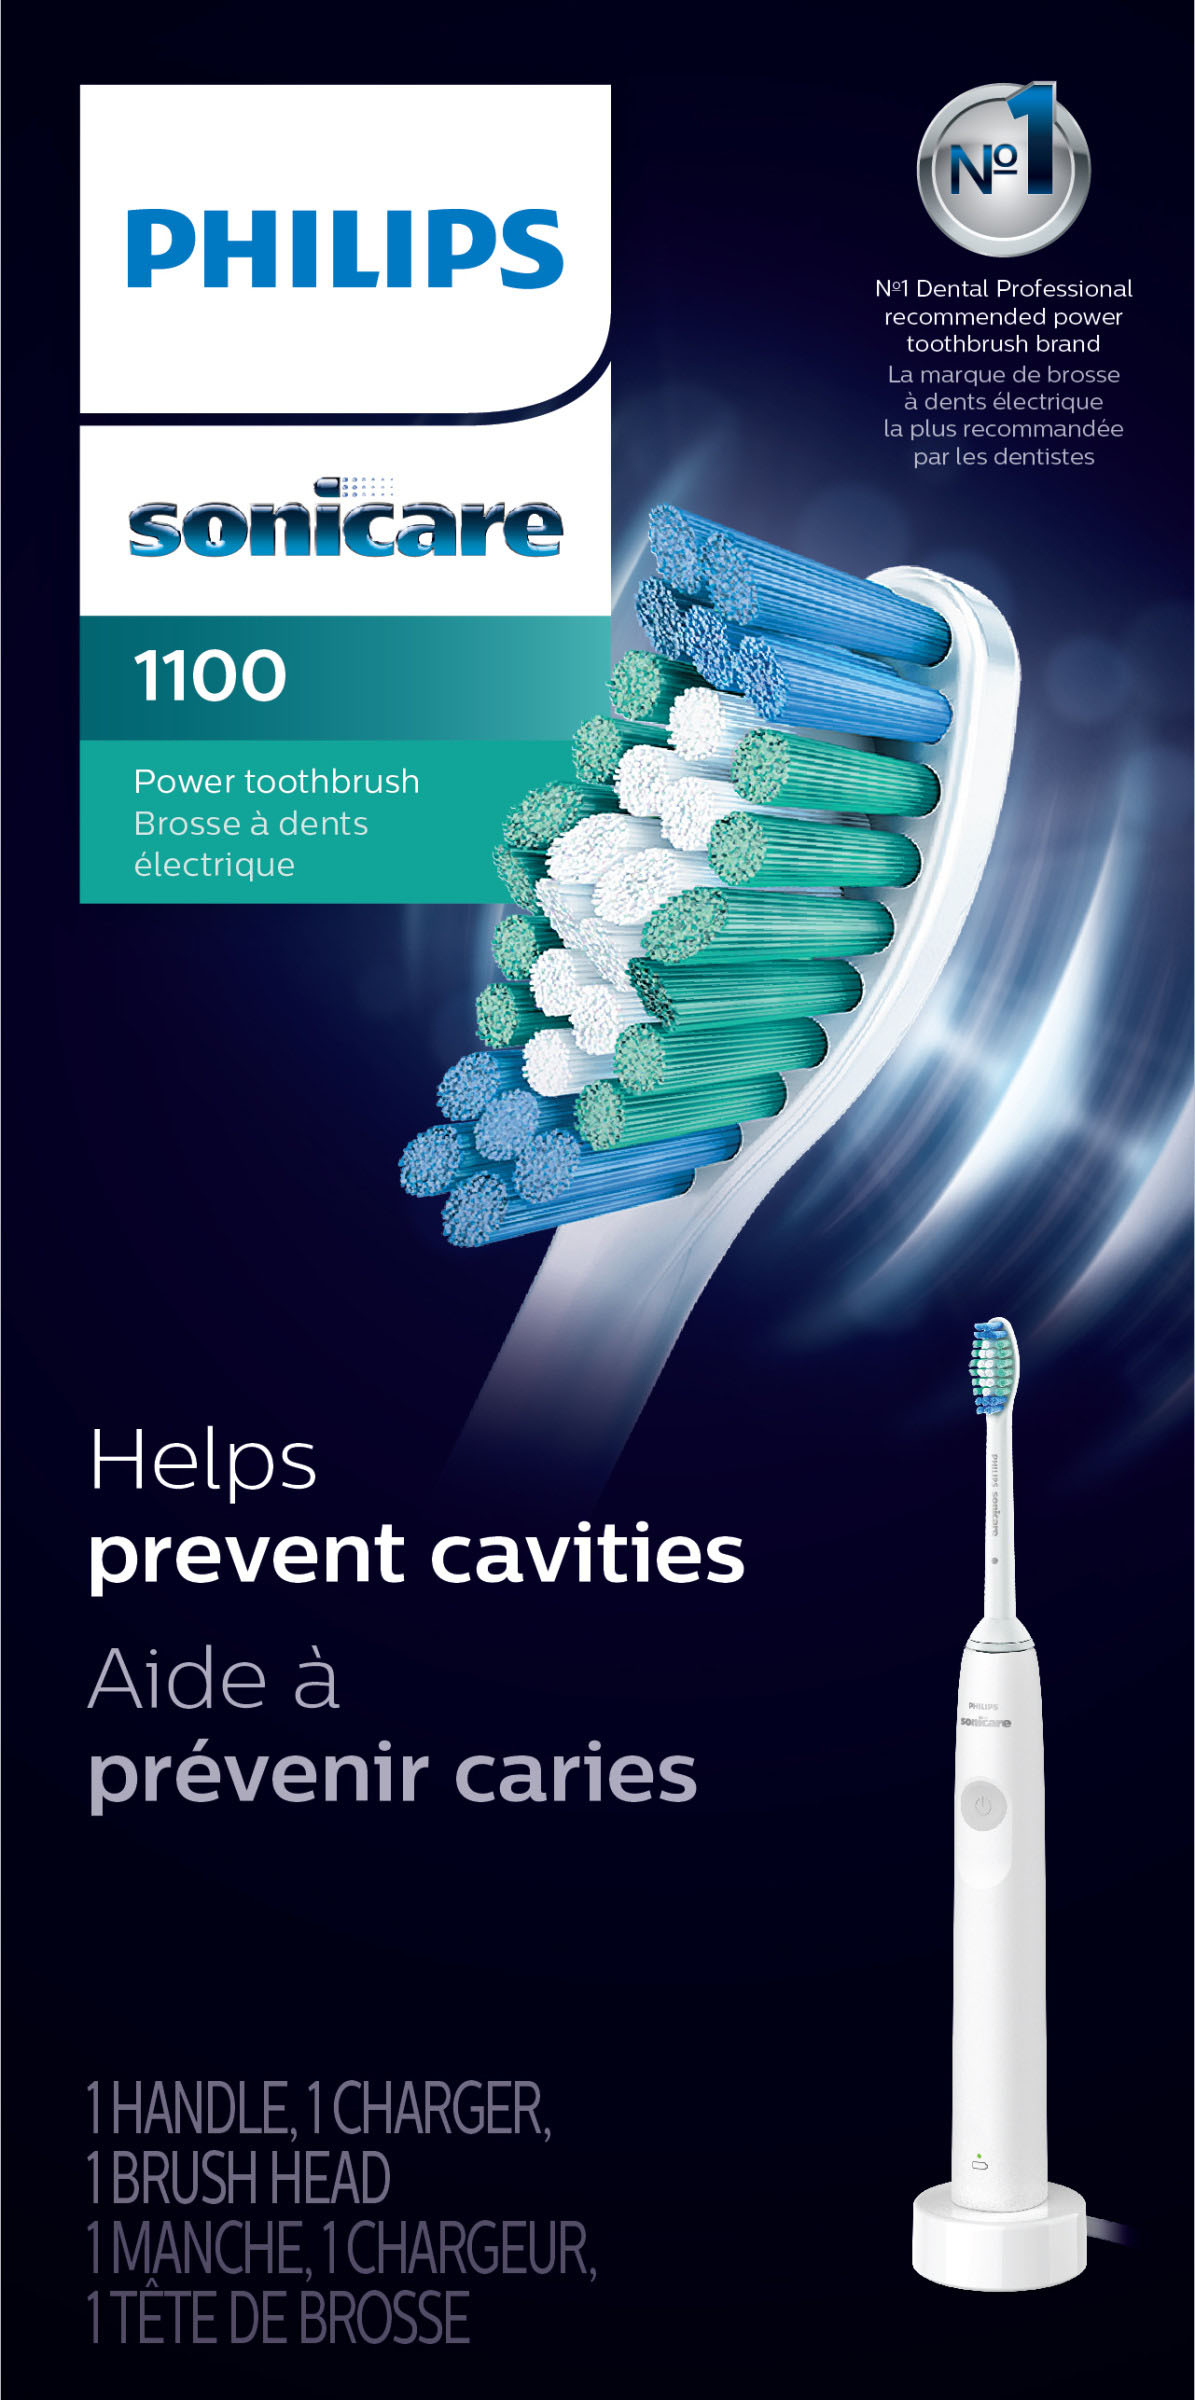 Philips Toothbrush Best - Rechargeable Power 1100 Toothbrush, Electric HX3641/02 White Sonicare Grey Buy